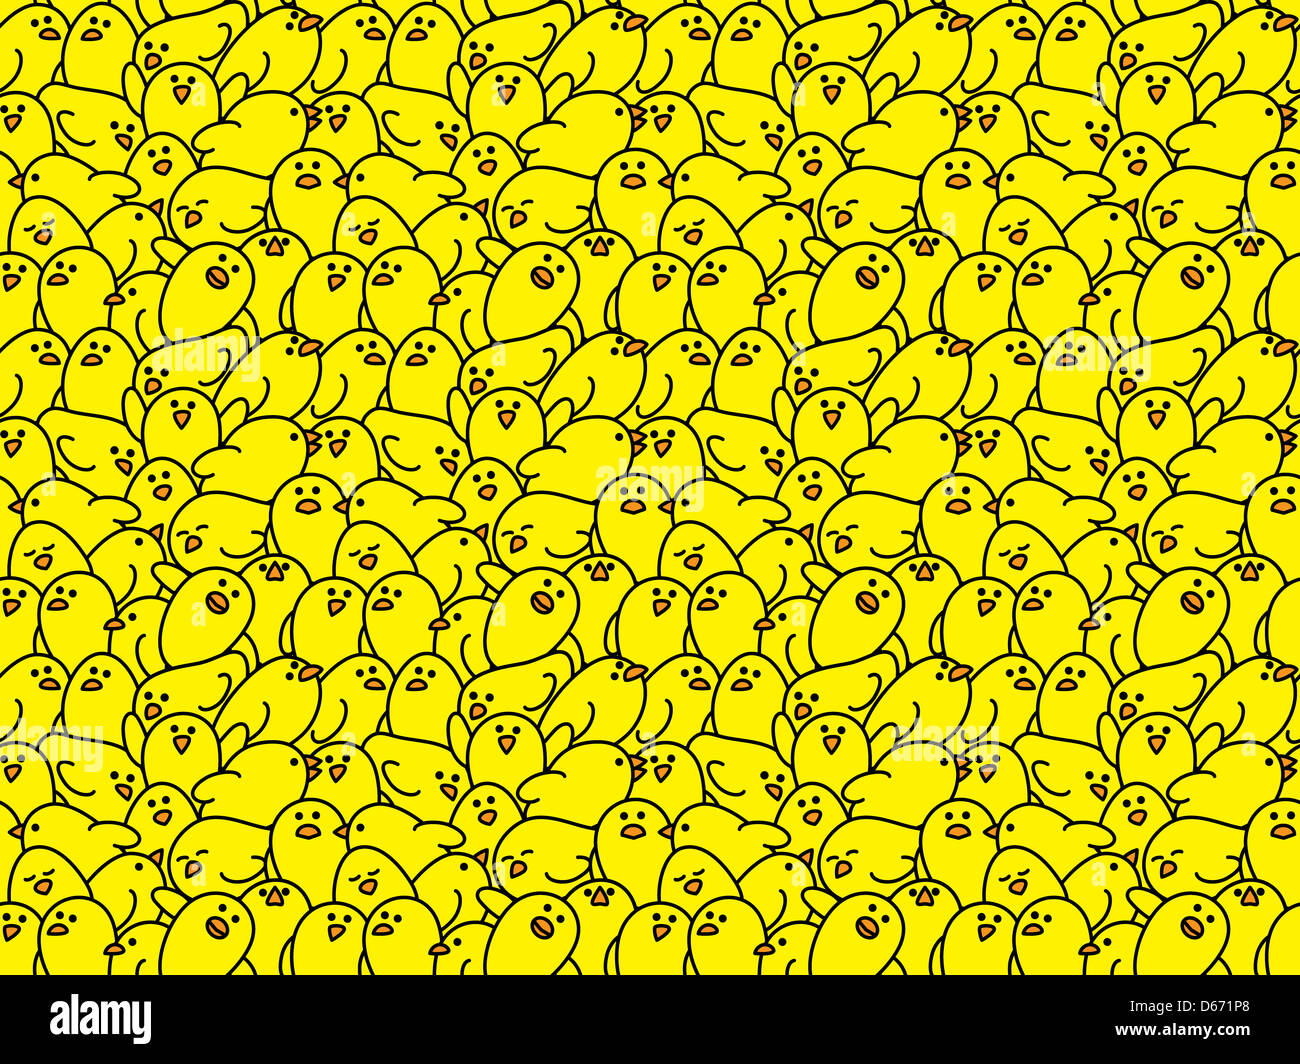 Crowd of Yellow Chicks with Squashed Together in Various Poses creating a Repeating Wallpaper Background Stock Photo